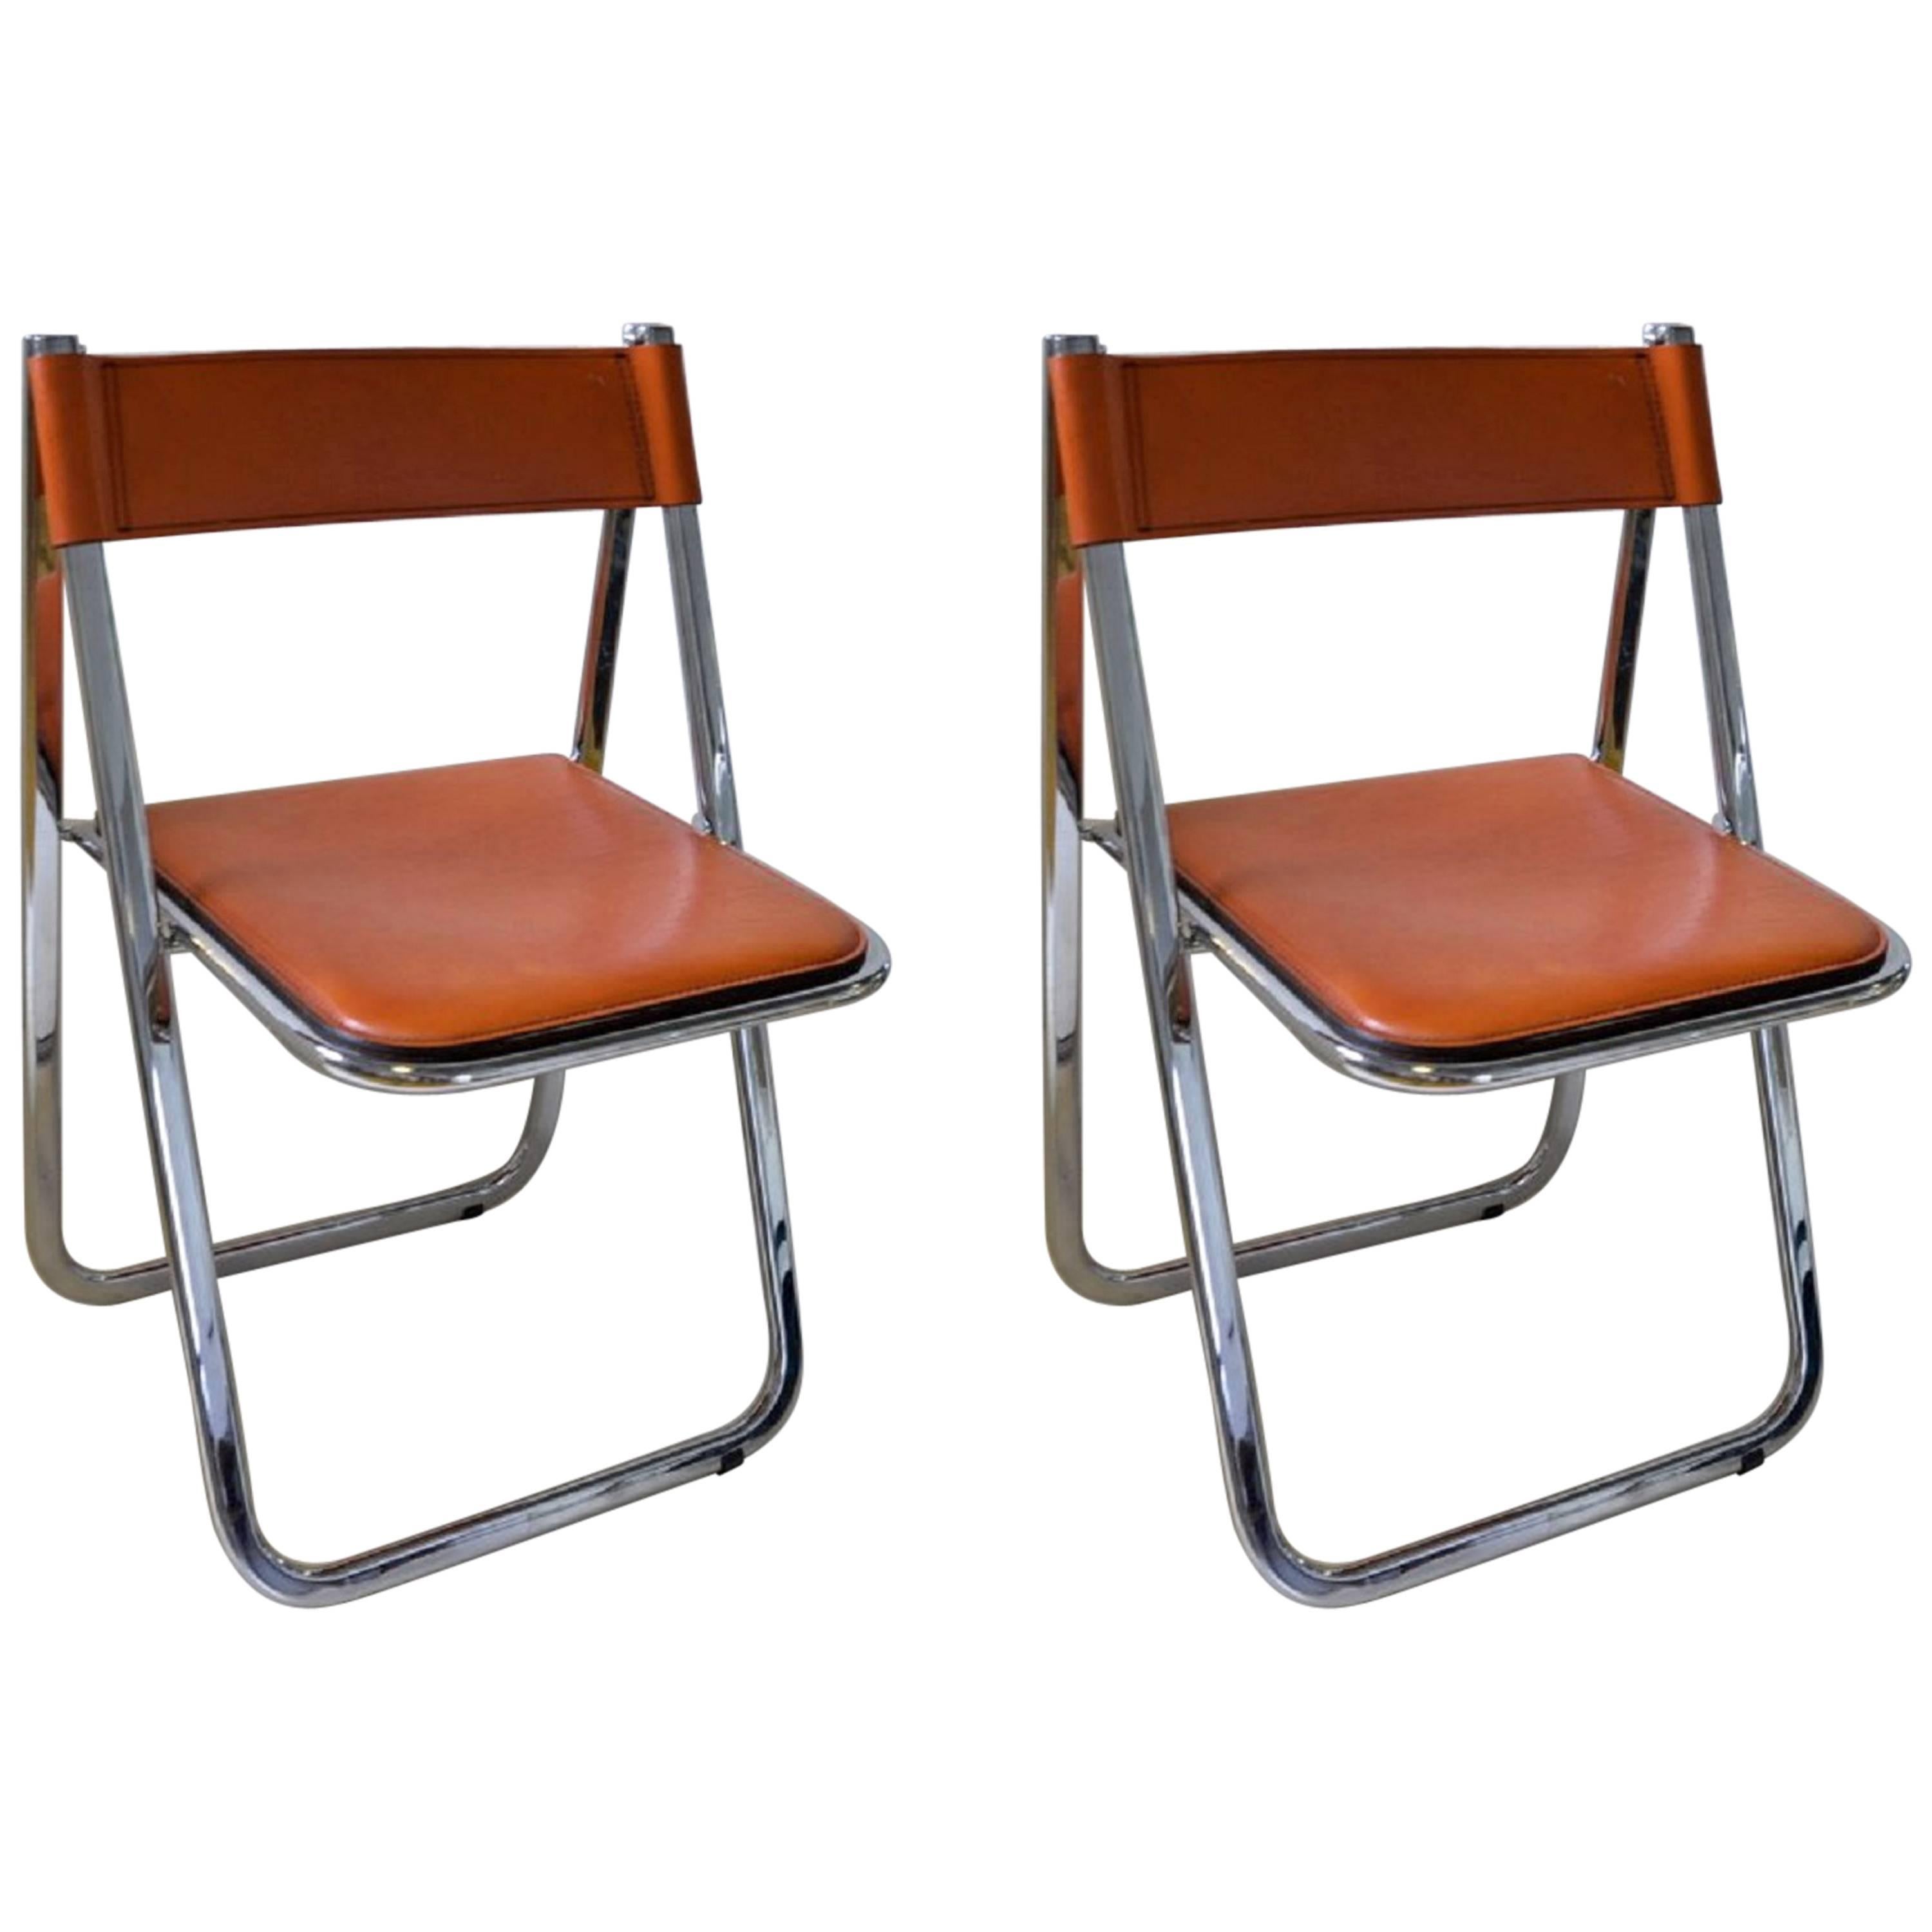 This pair of Tamara folding chairs by Italian maker Arrben is the quintessential example of the form in split leather and chrome-plated steel polished to a mirror finish. The original floor protectors are present.

We also have a set of four of